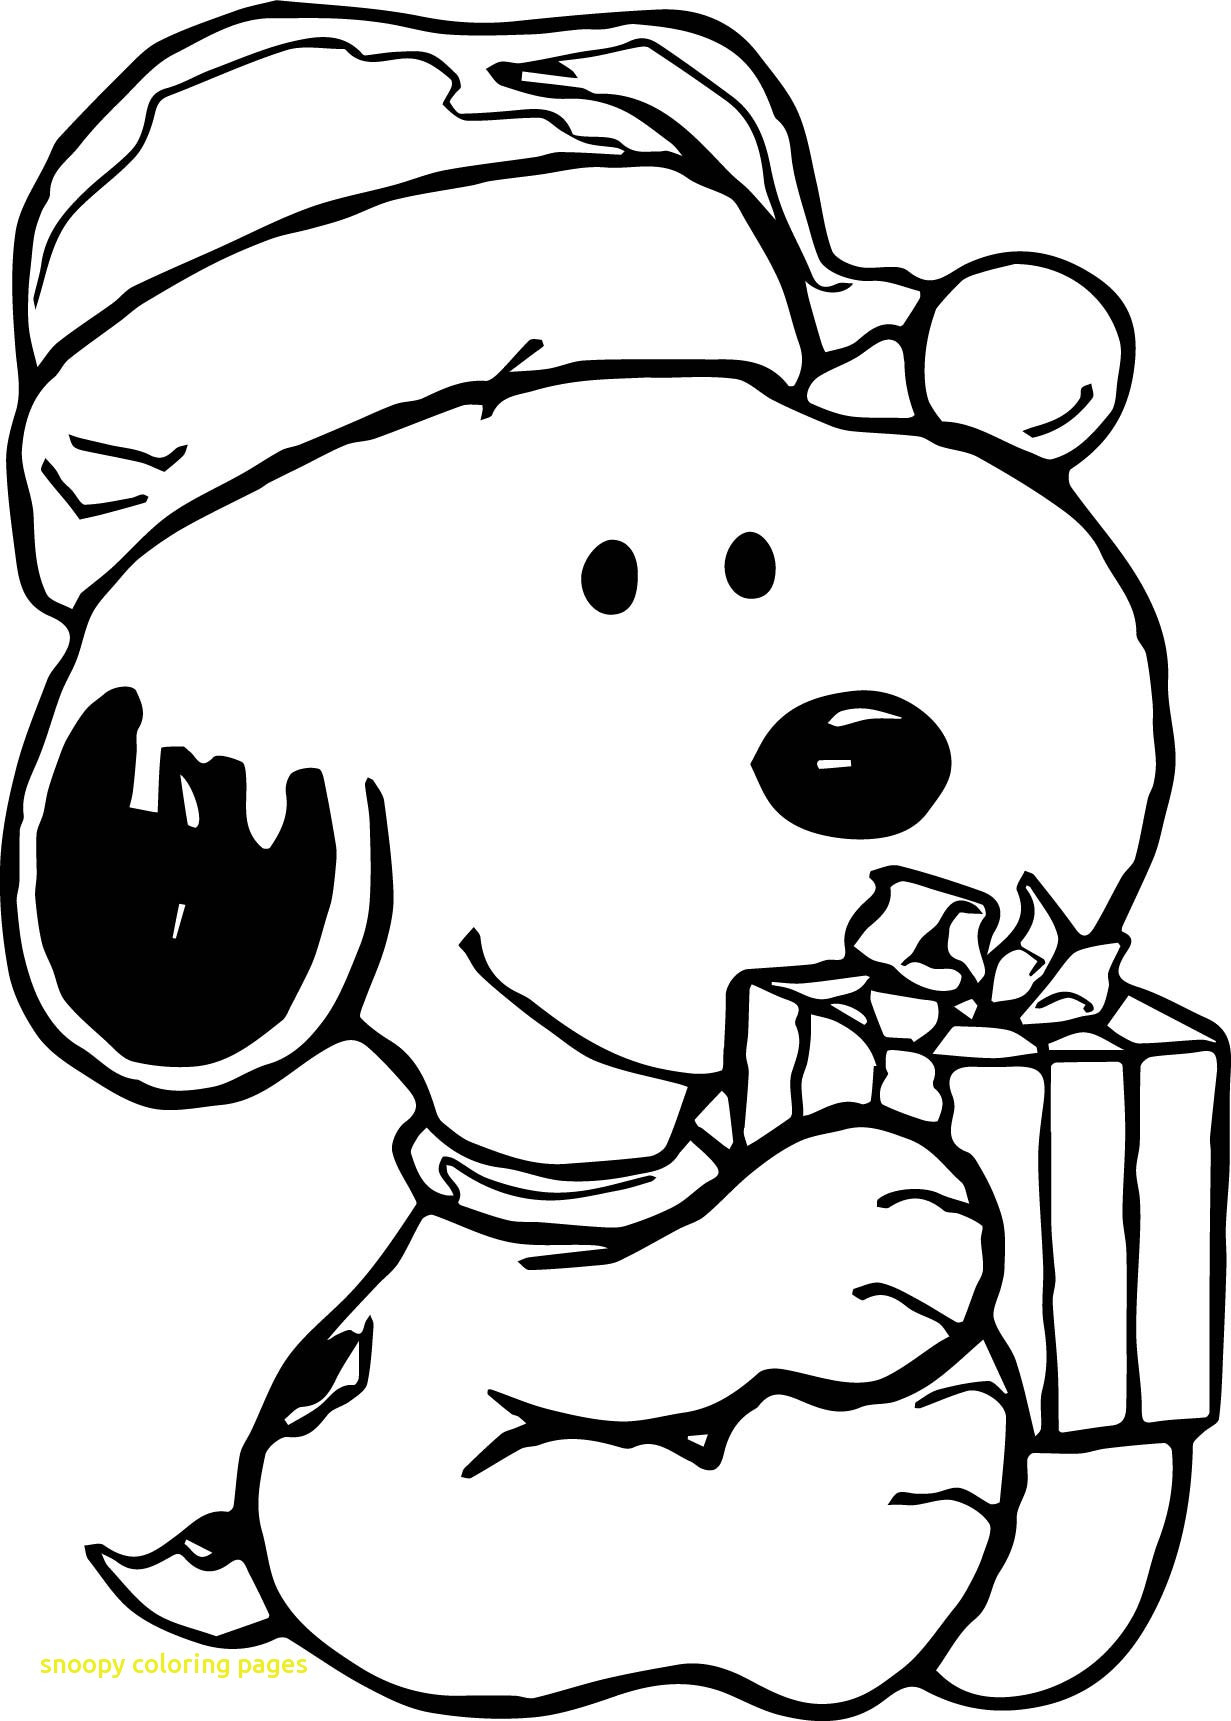 Printable Snoopy Coloring Pages
 Snoopy Christmas Drawing at GetDrawings